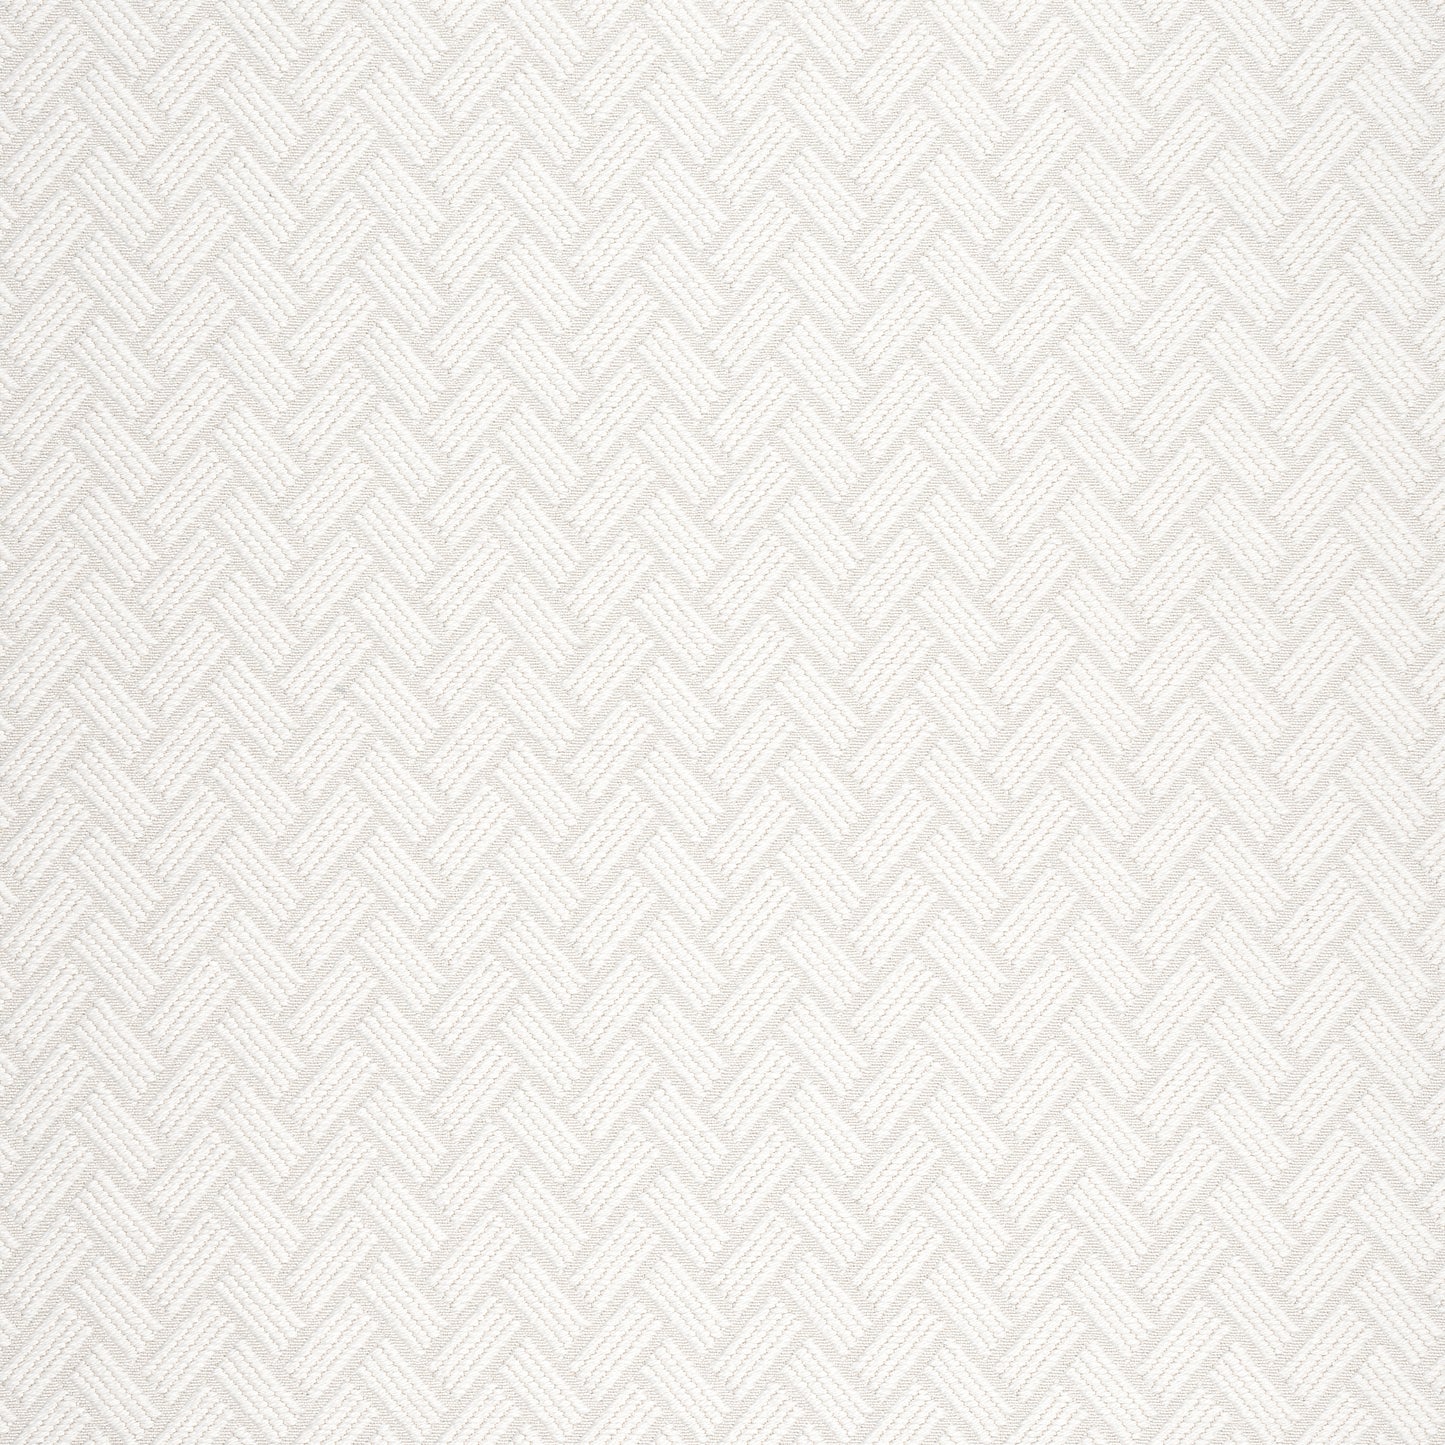 Purchase Thibaut Fabric SKU W74220 pattern name Cobblegrey color Ivory